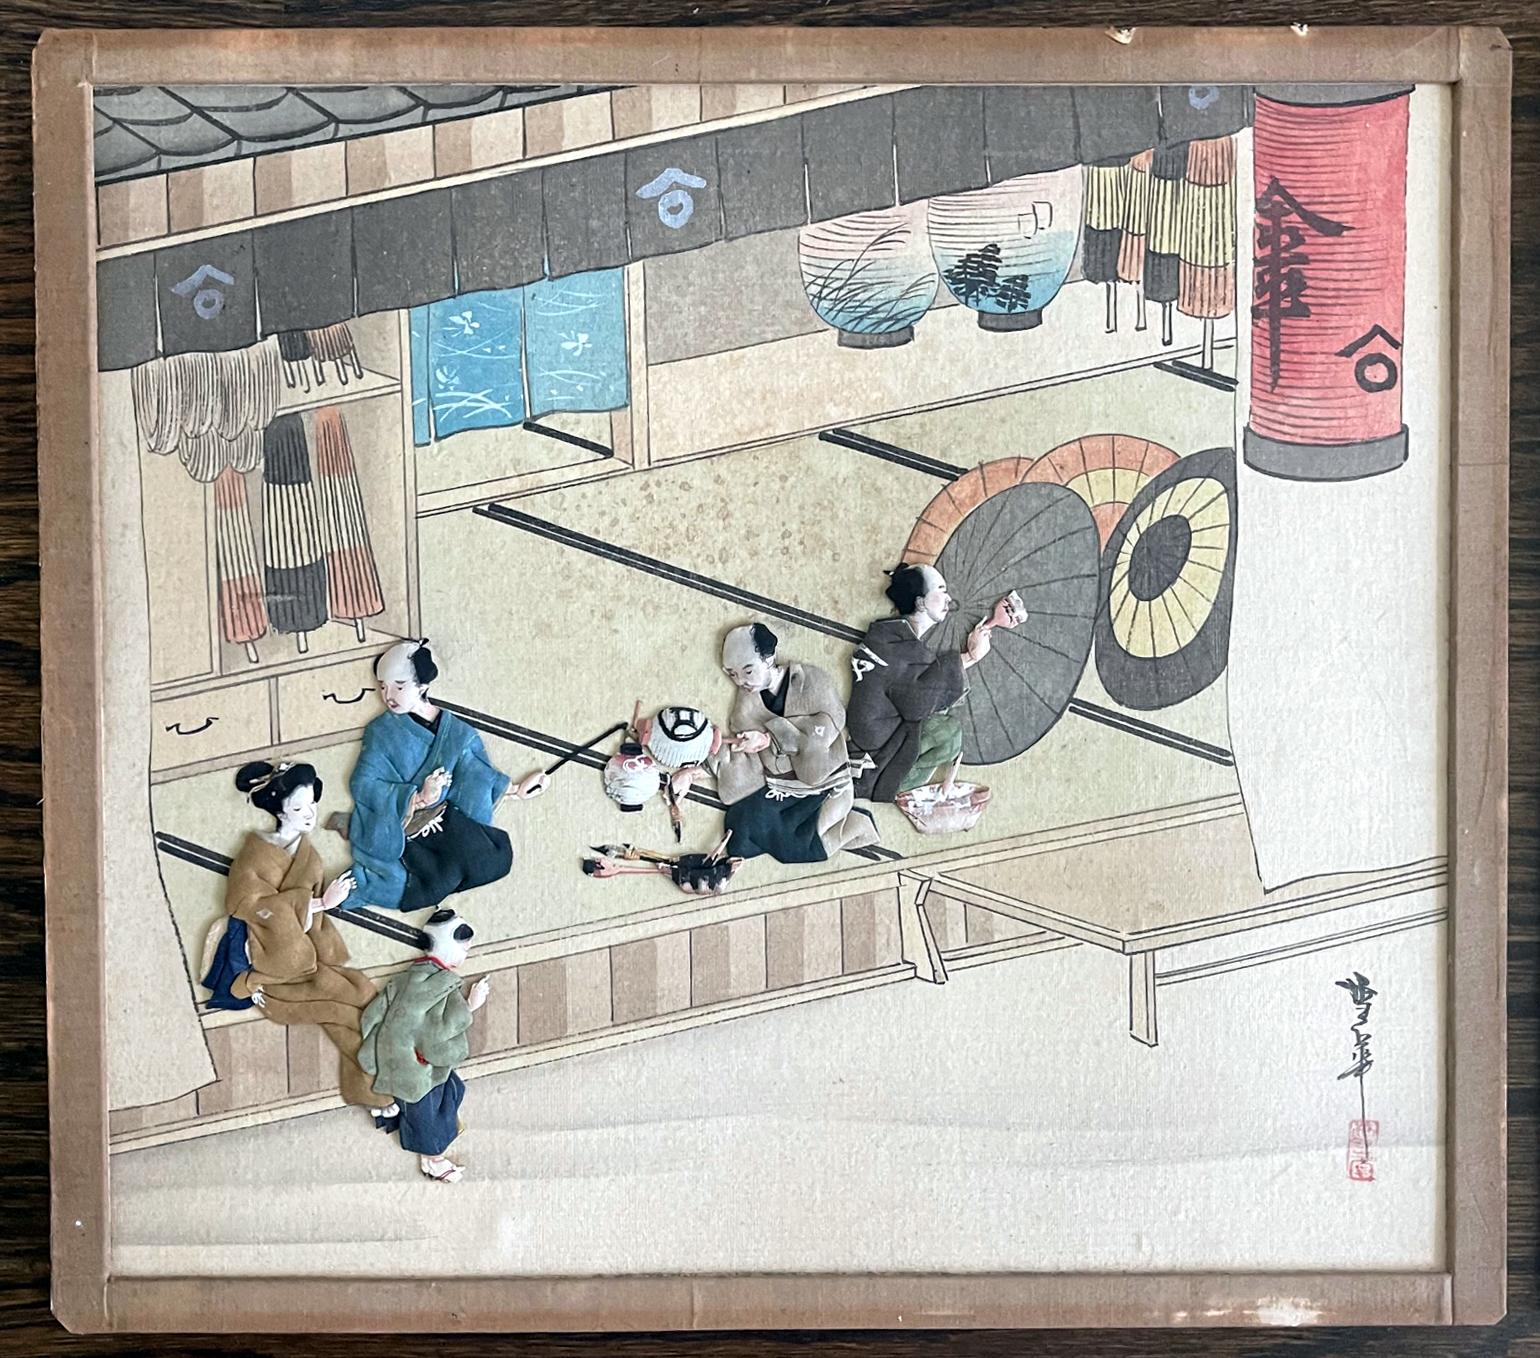 On offer is a set of five Japanese textile art panels called Oshi-E circa Meiji Period (1868-1912). This usual set of panels depict various aspects of daily life in Edo time with beautiful details. Some of these panels are snapshots of the buzzling